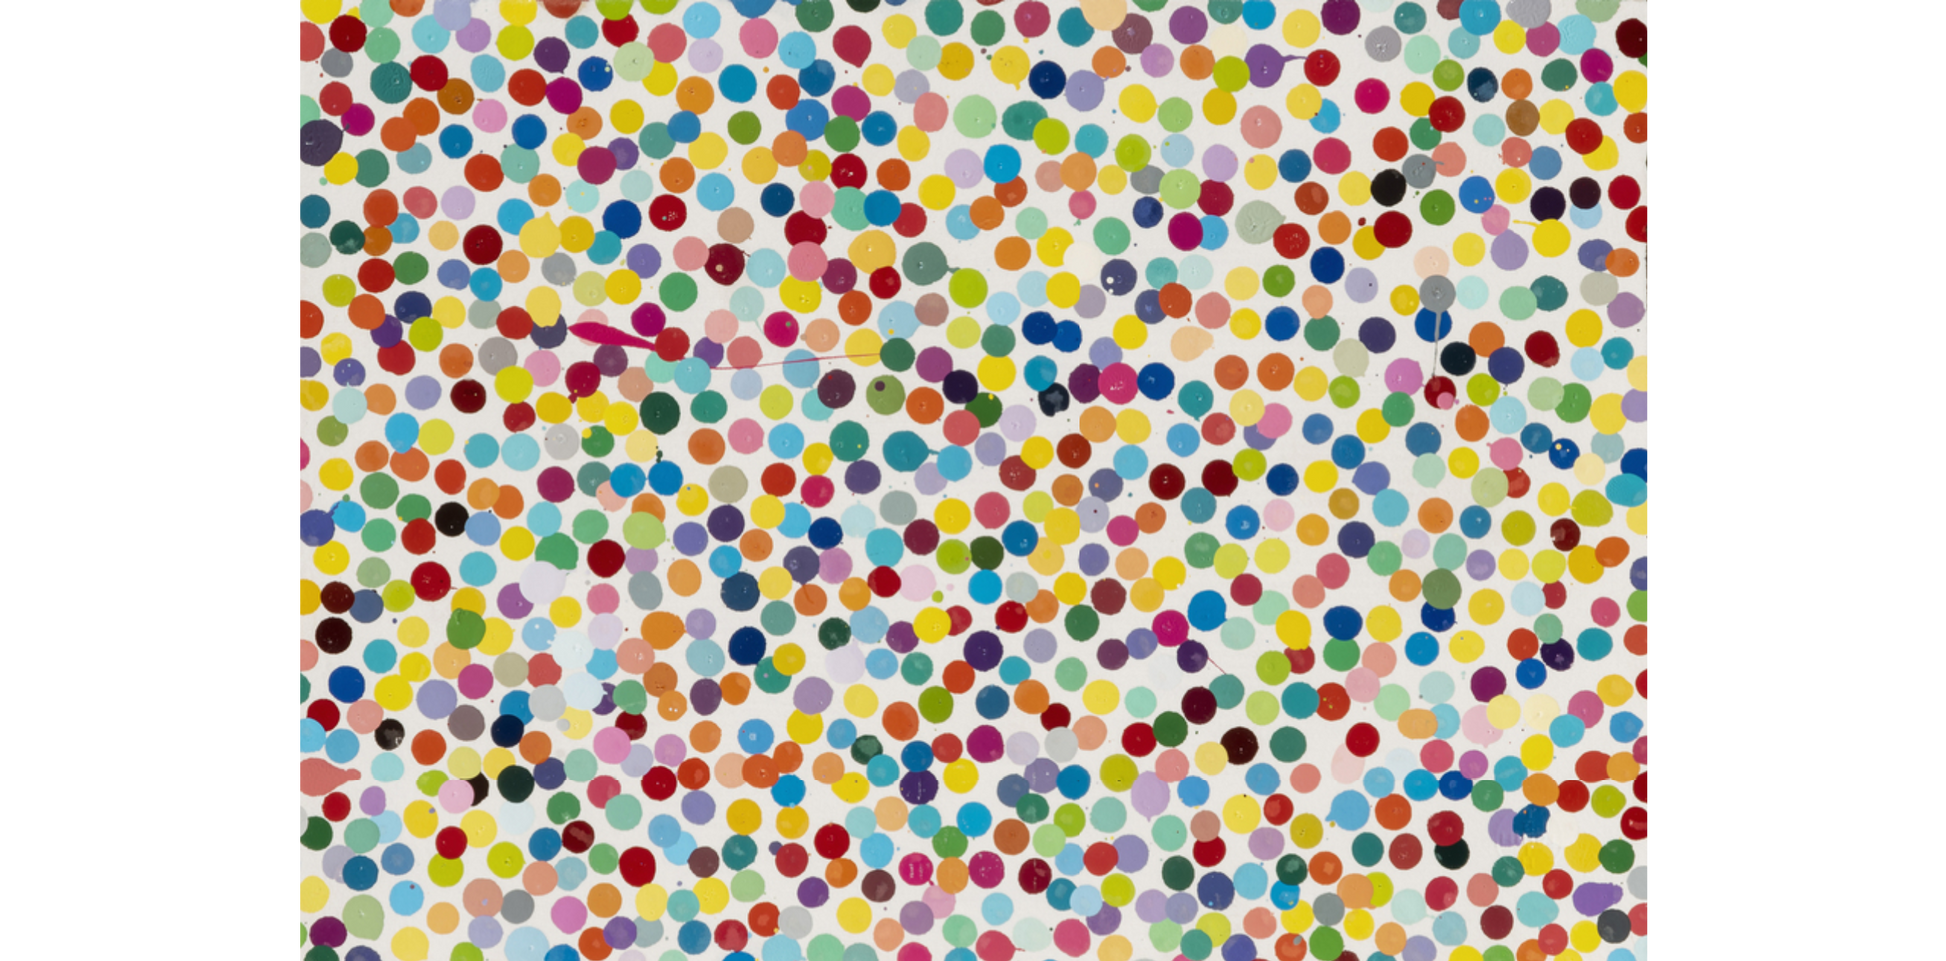 Damien Hirst, The Currency Physical Print For Sale series of enamel coloured dots on paper